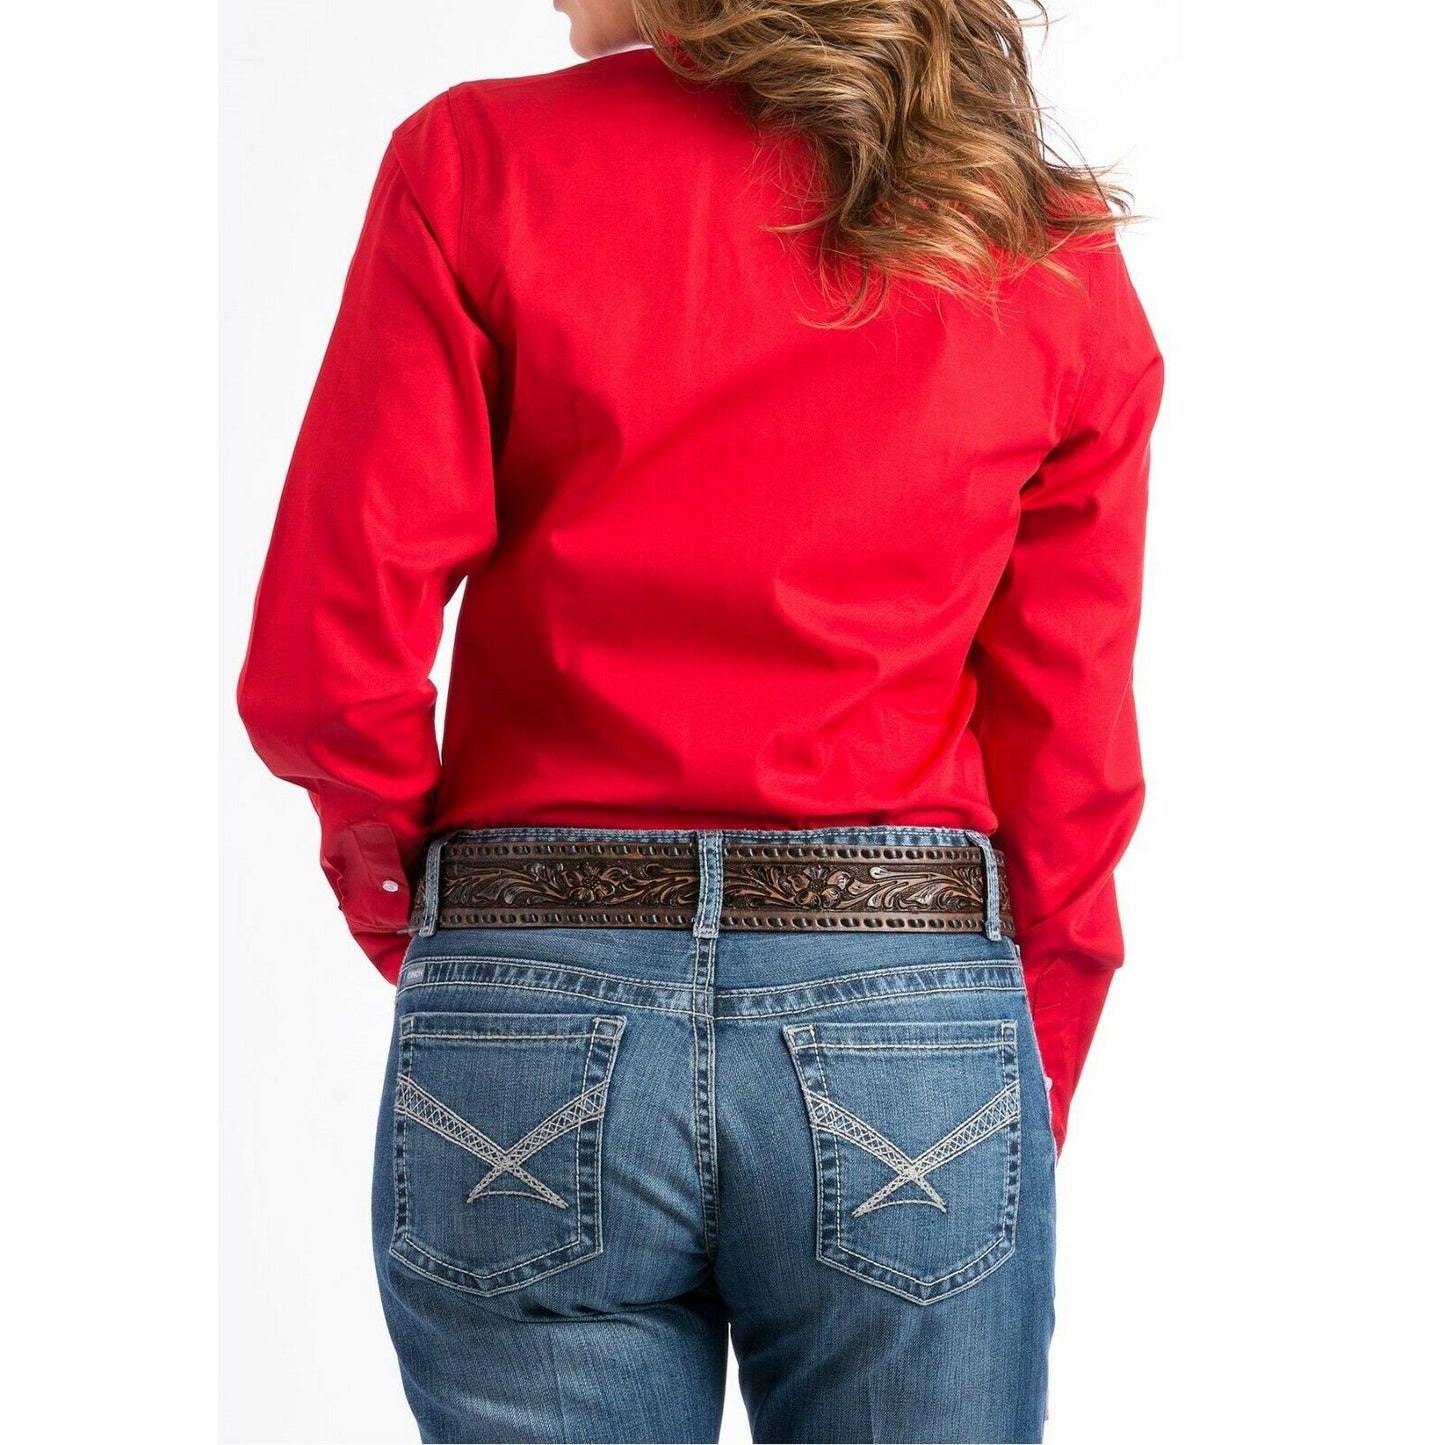 Load image into Gallery viewer, Cinch Ladies Solid Red Button-Down Shirt MSW9164032
